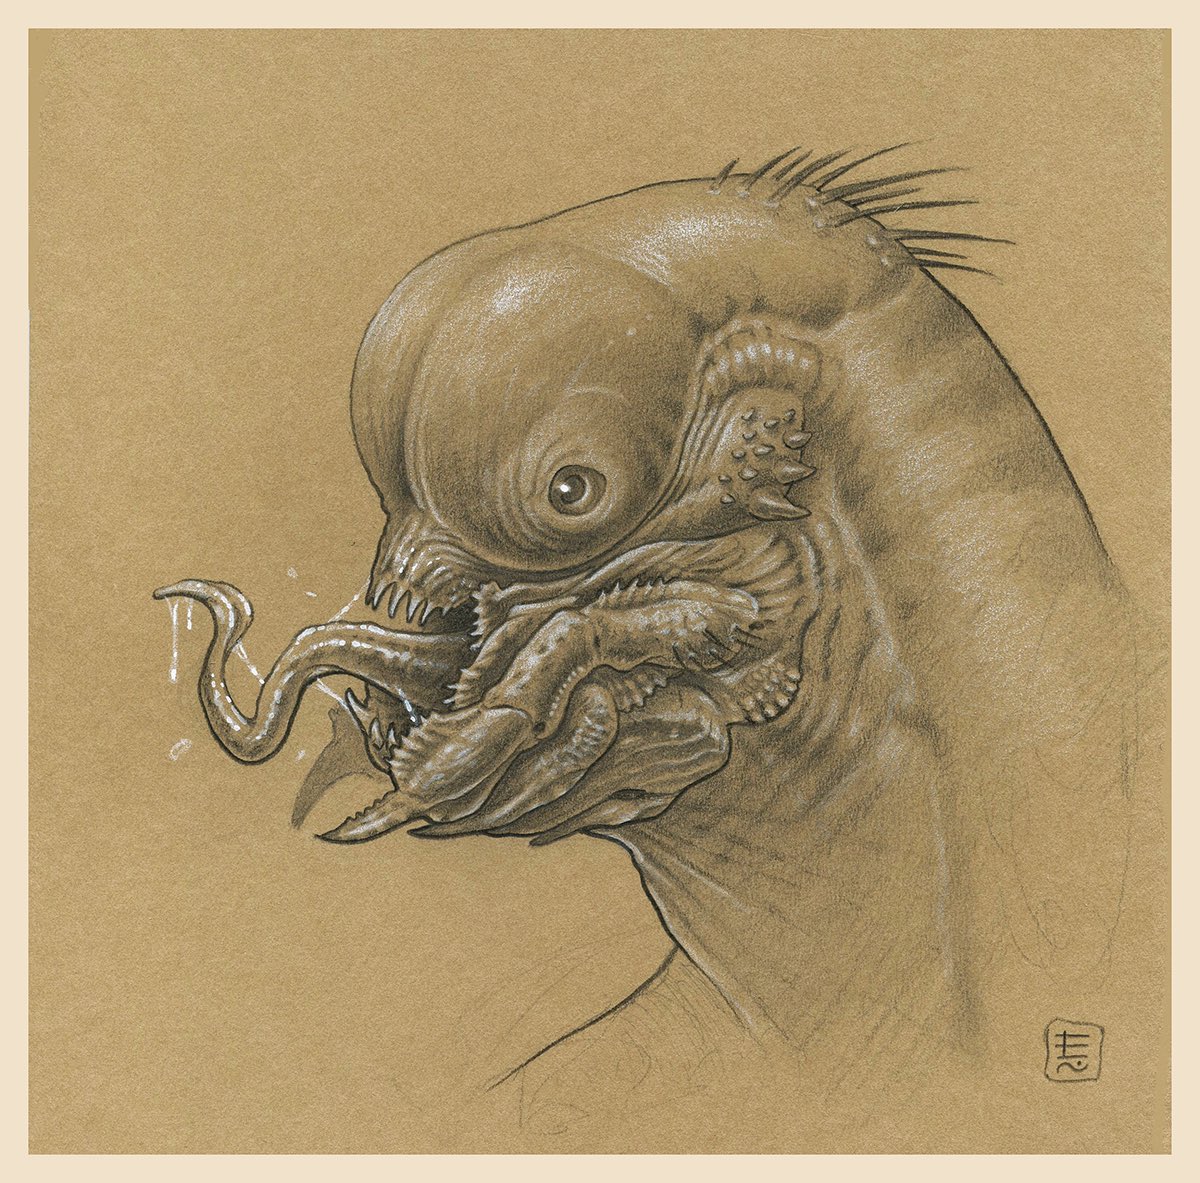 A sketch for one of my lovely backers who supported my book “Creatures & Pictures”. #creaturedesign #collectingart #originalart #entenn #creaturedesignbook #alien #crabface #drawingfromtheimagination